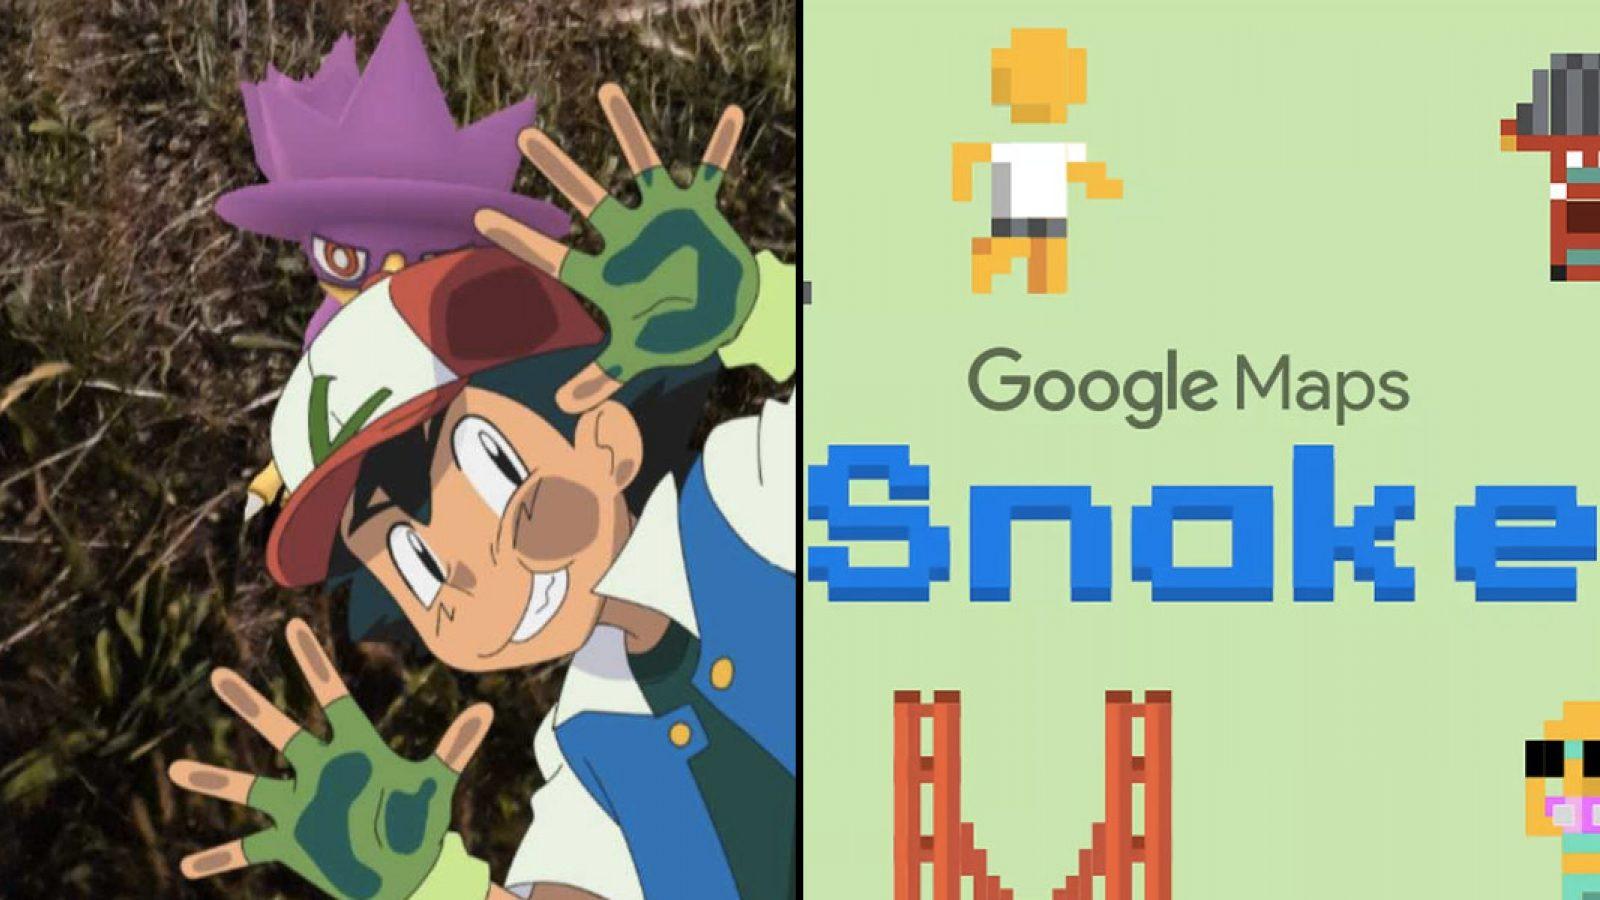 Google's 2019 April Fool's Day Joke: Play 'Snake' Within Maps on